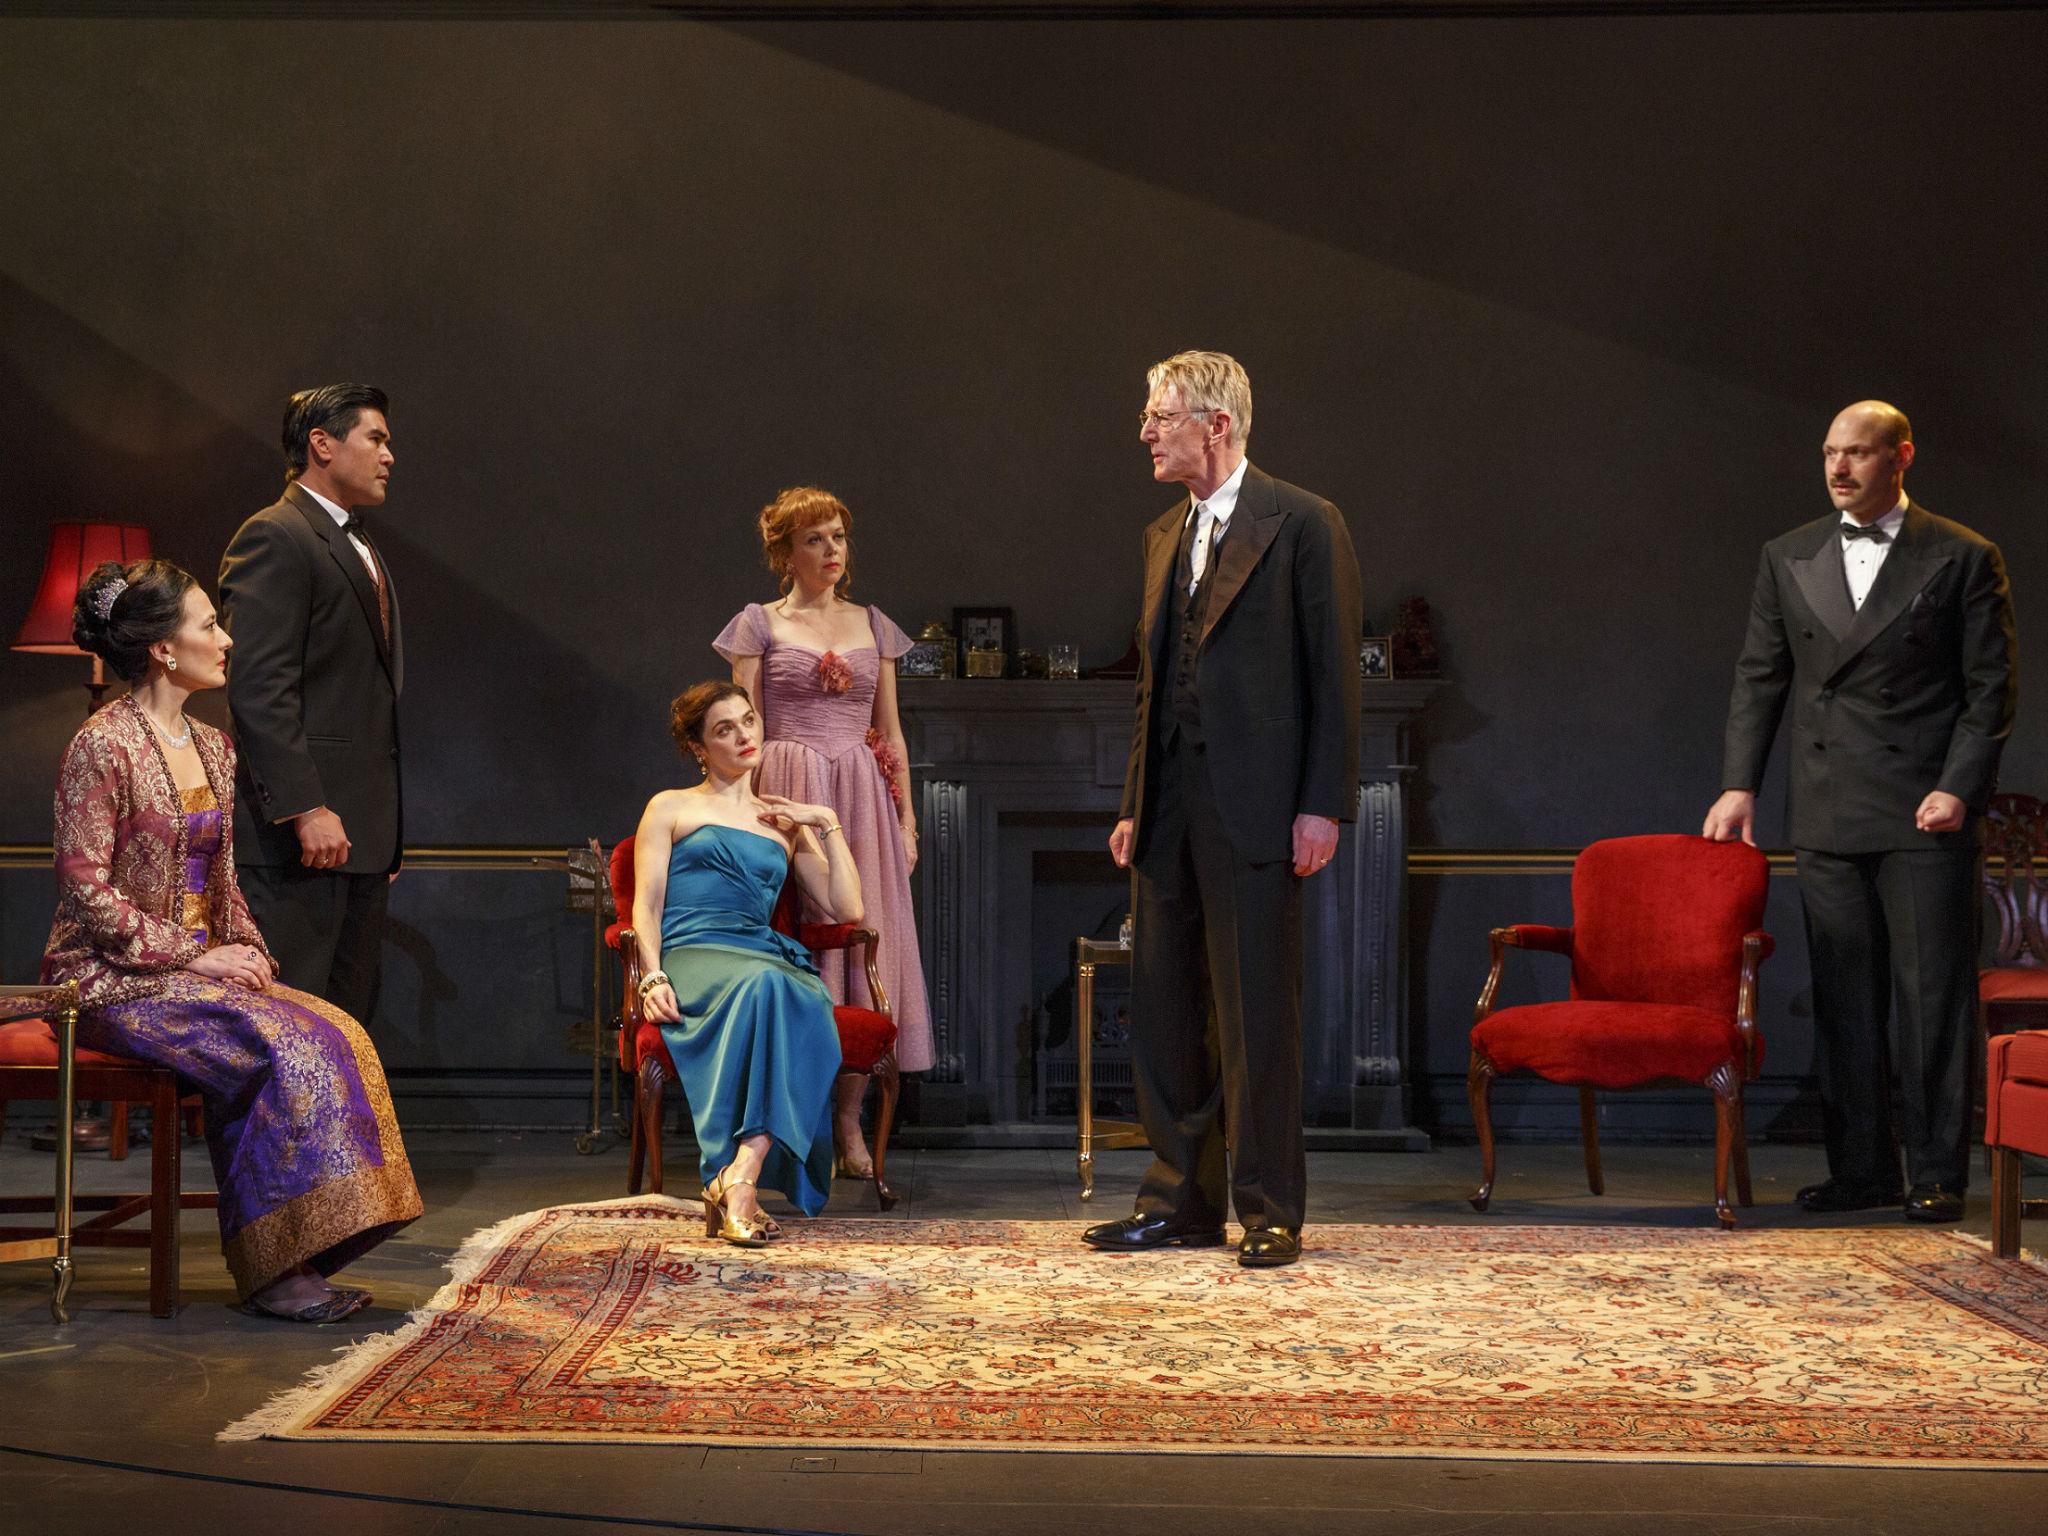 There’s a crisis: Rachel Weisz (seated, centre) as Susan Traherne, with Corey Stoll (far right) as Raymond Brock and Byron Jennings (second from right) as Leonard Darwin, in the Suez scene from David Hare’s ‘Plenty’ at the Public Theatre, New York.